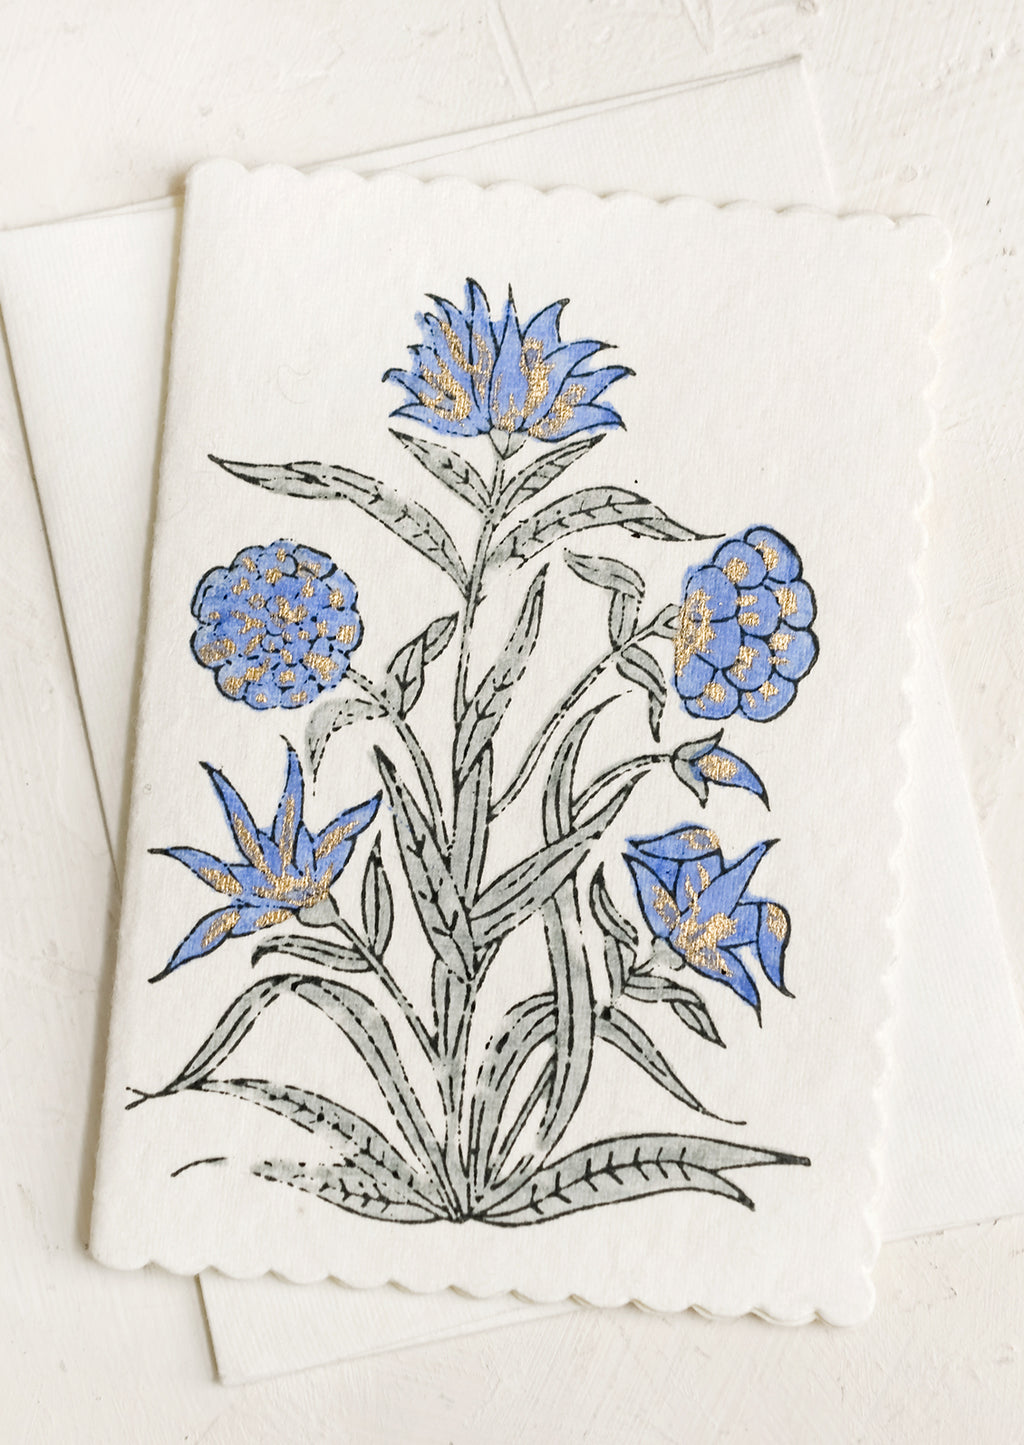 Periwinkle: A block printed periwinkle floral card with scalloped edges.